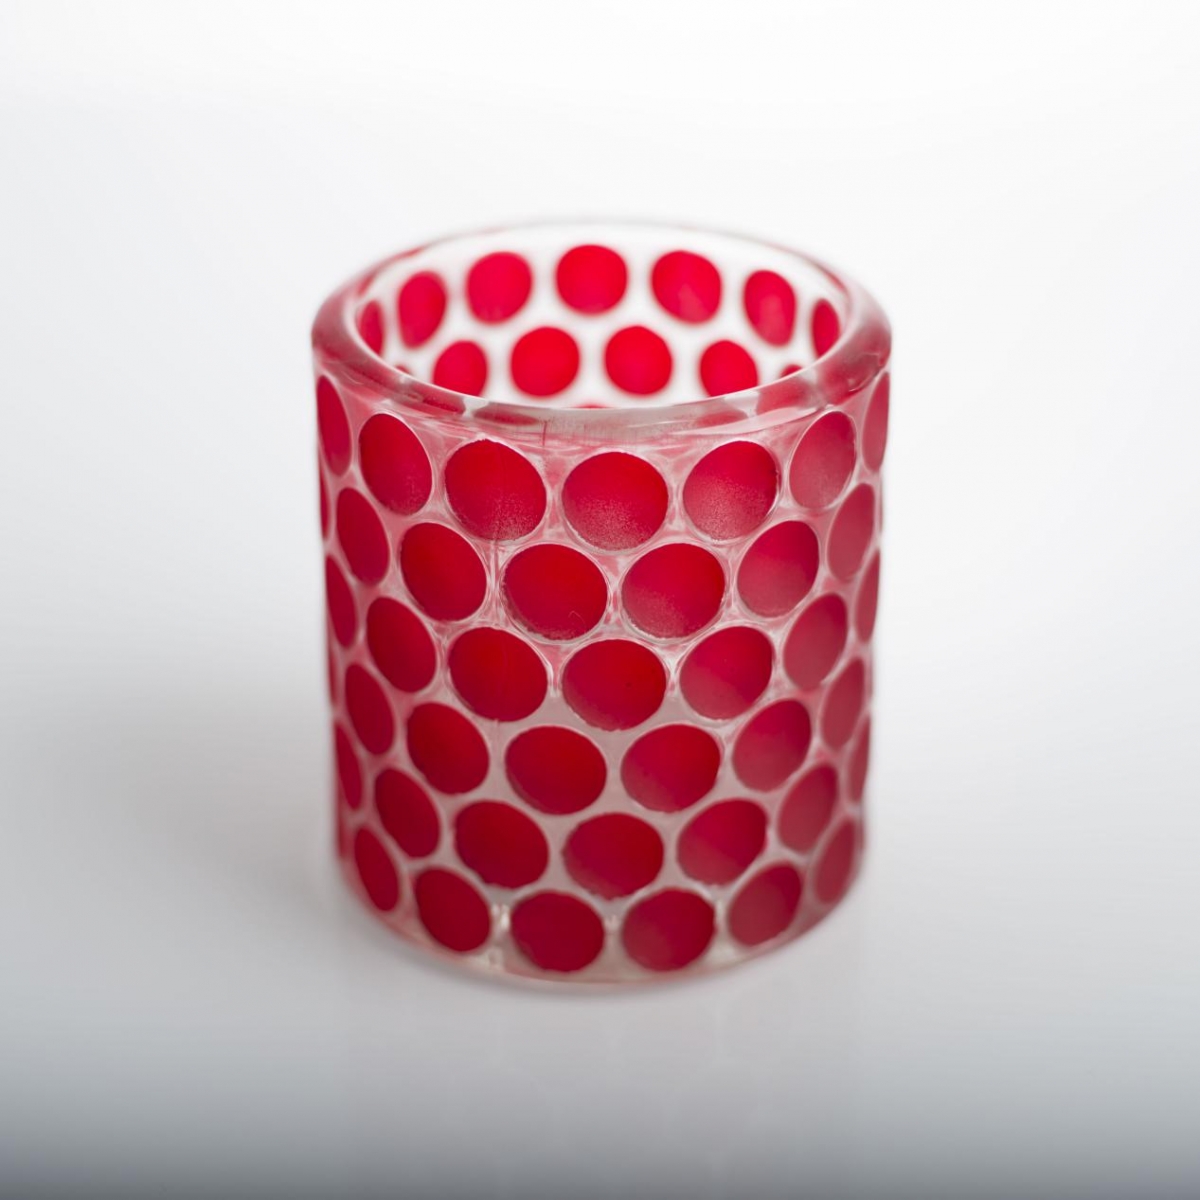 Candle Holder : Polish Glass ,Red Dot , Dot Embossing ,Chirstmas Home Decoration ,China Factory Price-HOWCANDLE-Candles,Scented Candles,Aromatherapy Candles,Soy Candles,Vegan Candles,Jar Candles,Pillar Candles,Candle Gift Sets,Essential Oils,Reed Diffuser,Candle Holder,